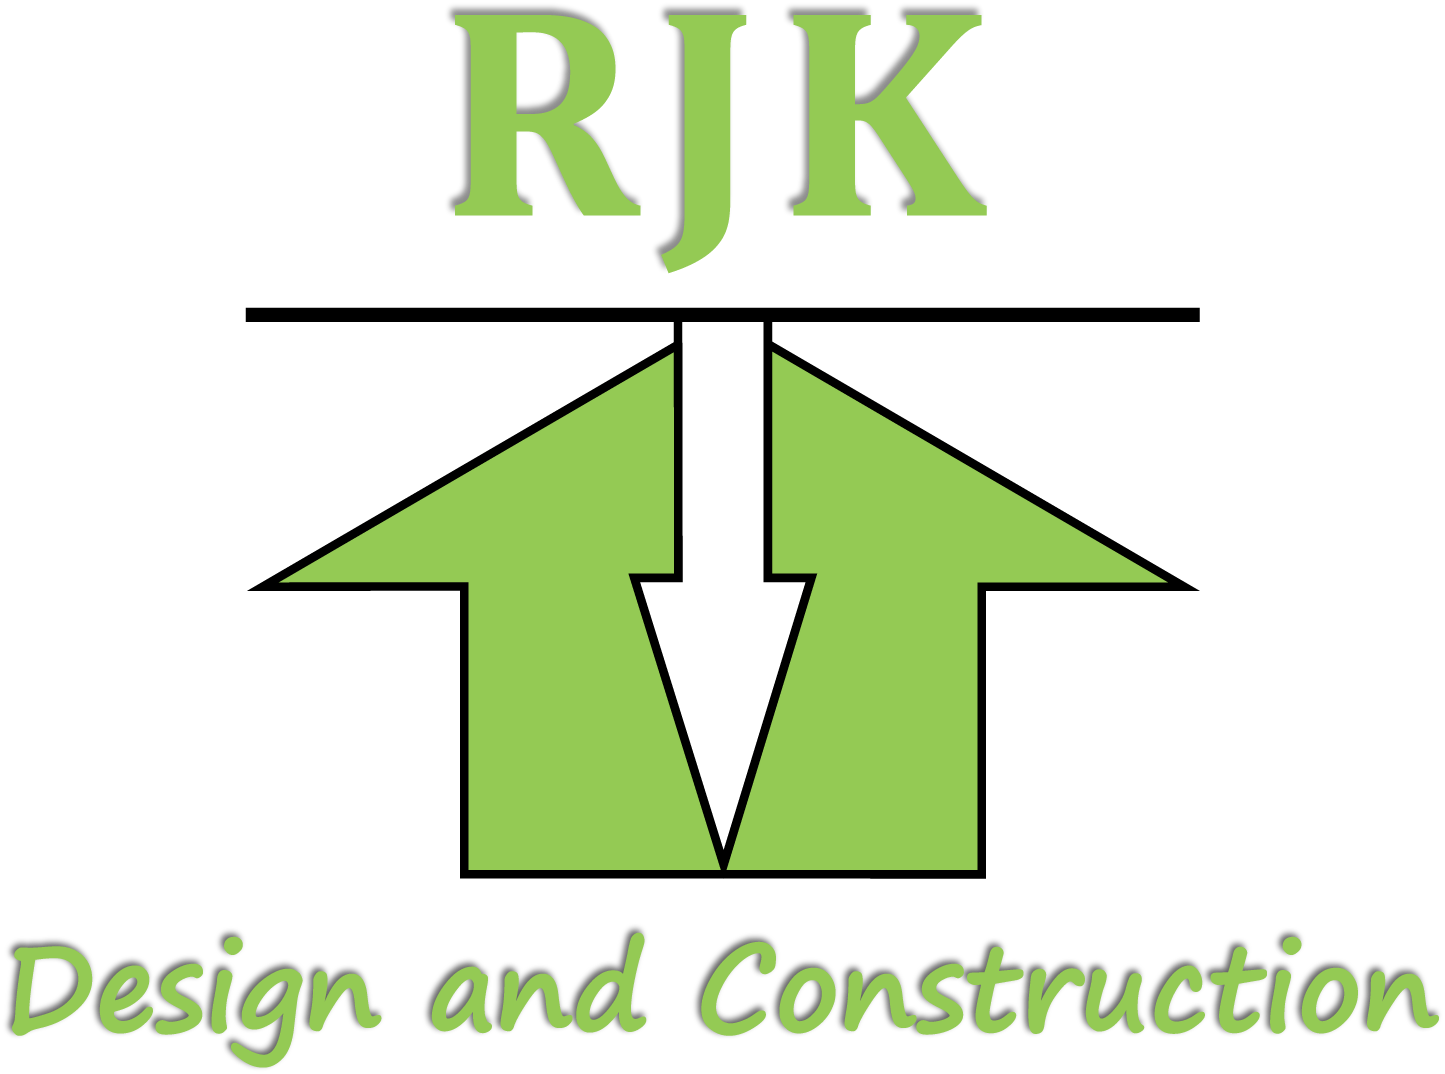 RJK Design & Construction | High Quality Additions, Bathrooms, and Kitchen,